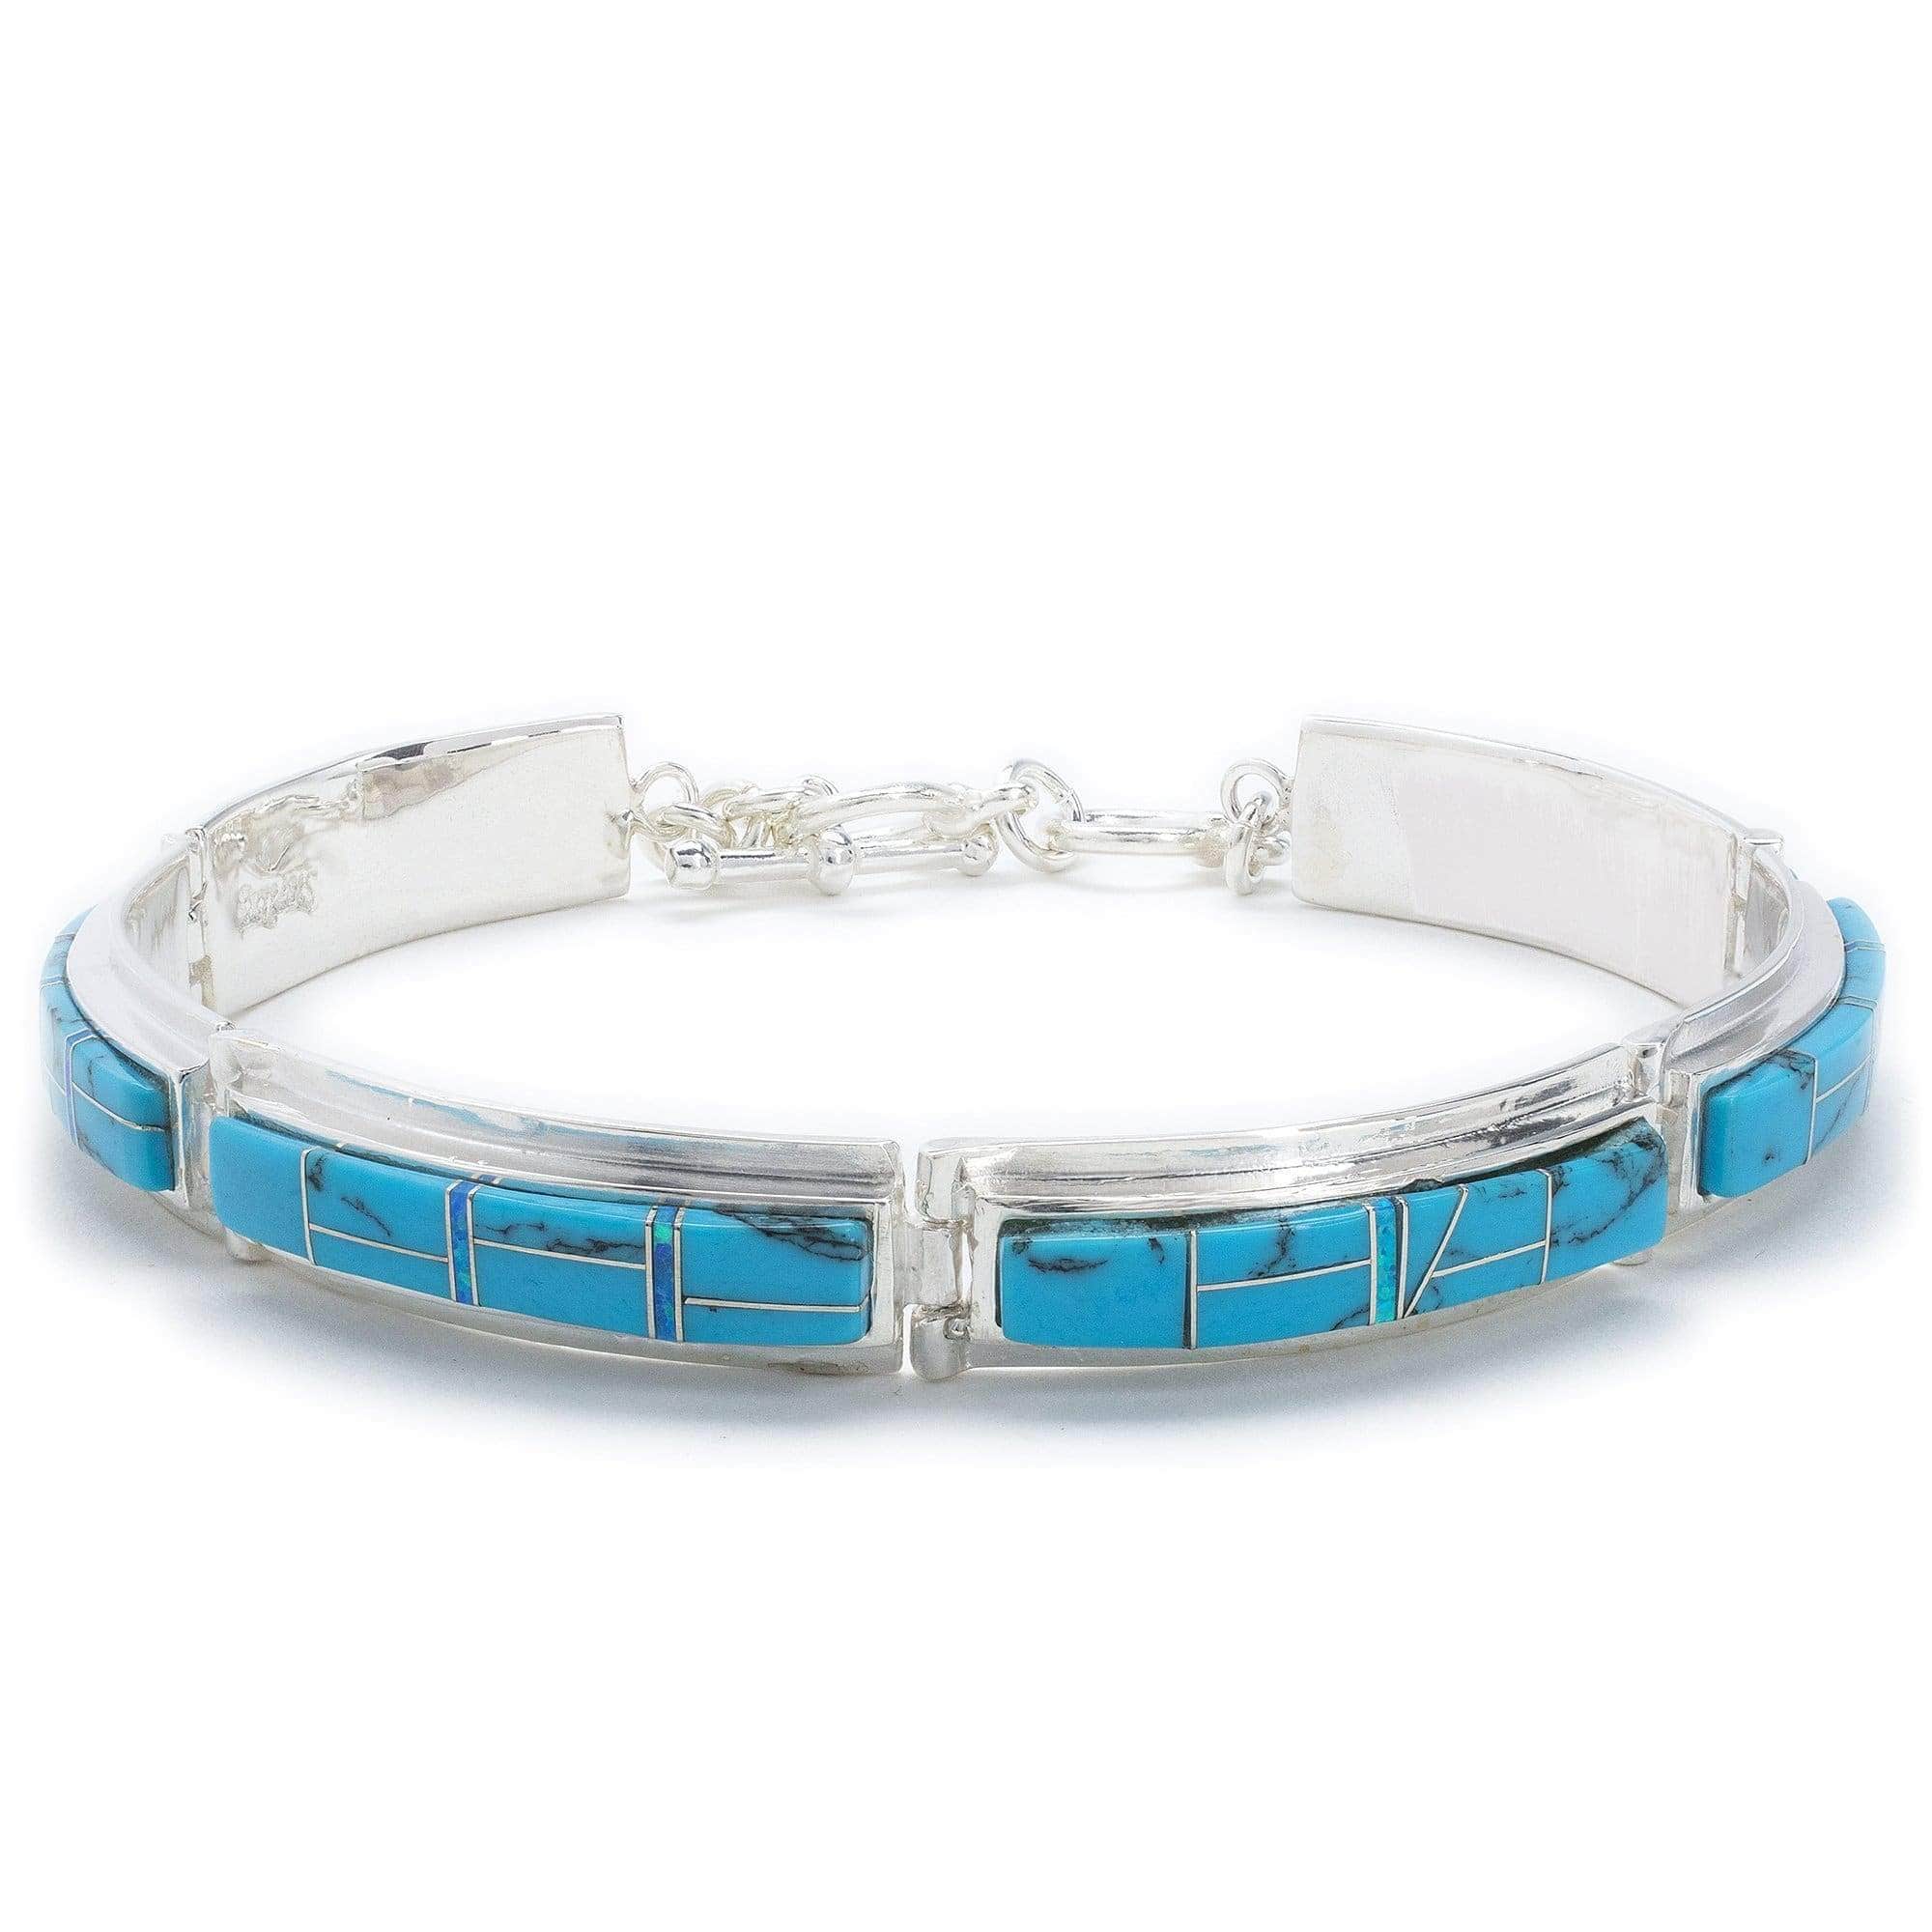 Kalifano Southwest Silver Jewelry Turquoise 925 Sterling Silver Bracelet USA Handmade with Opal Accent NMB.0556.TQ